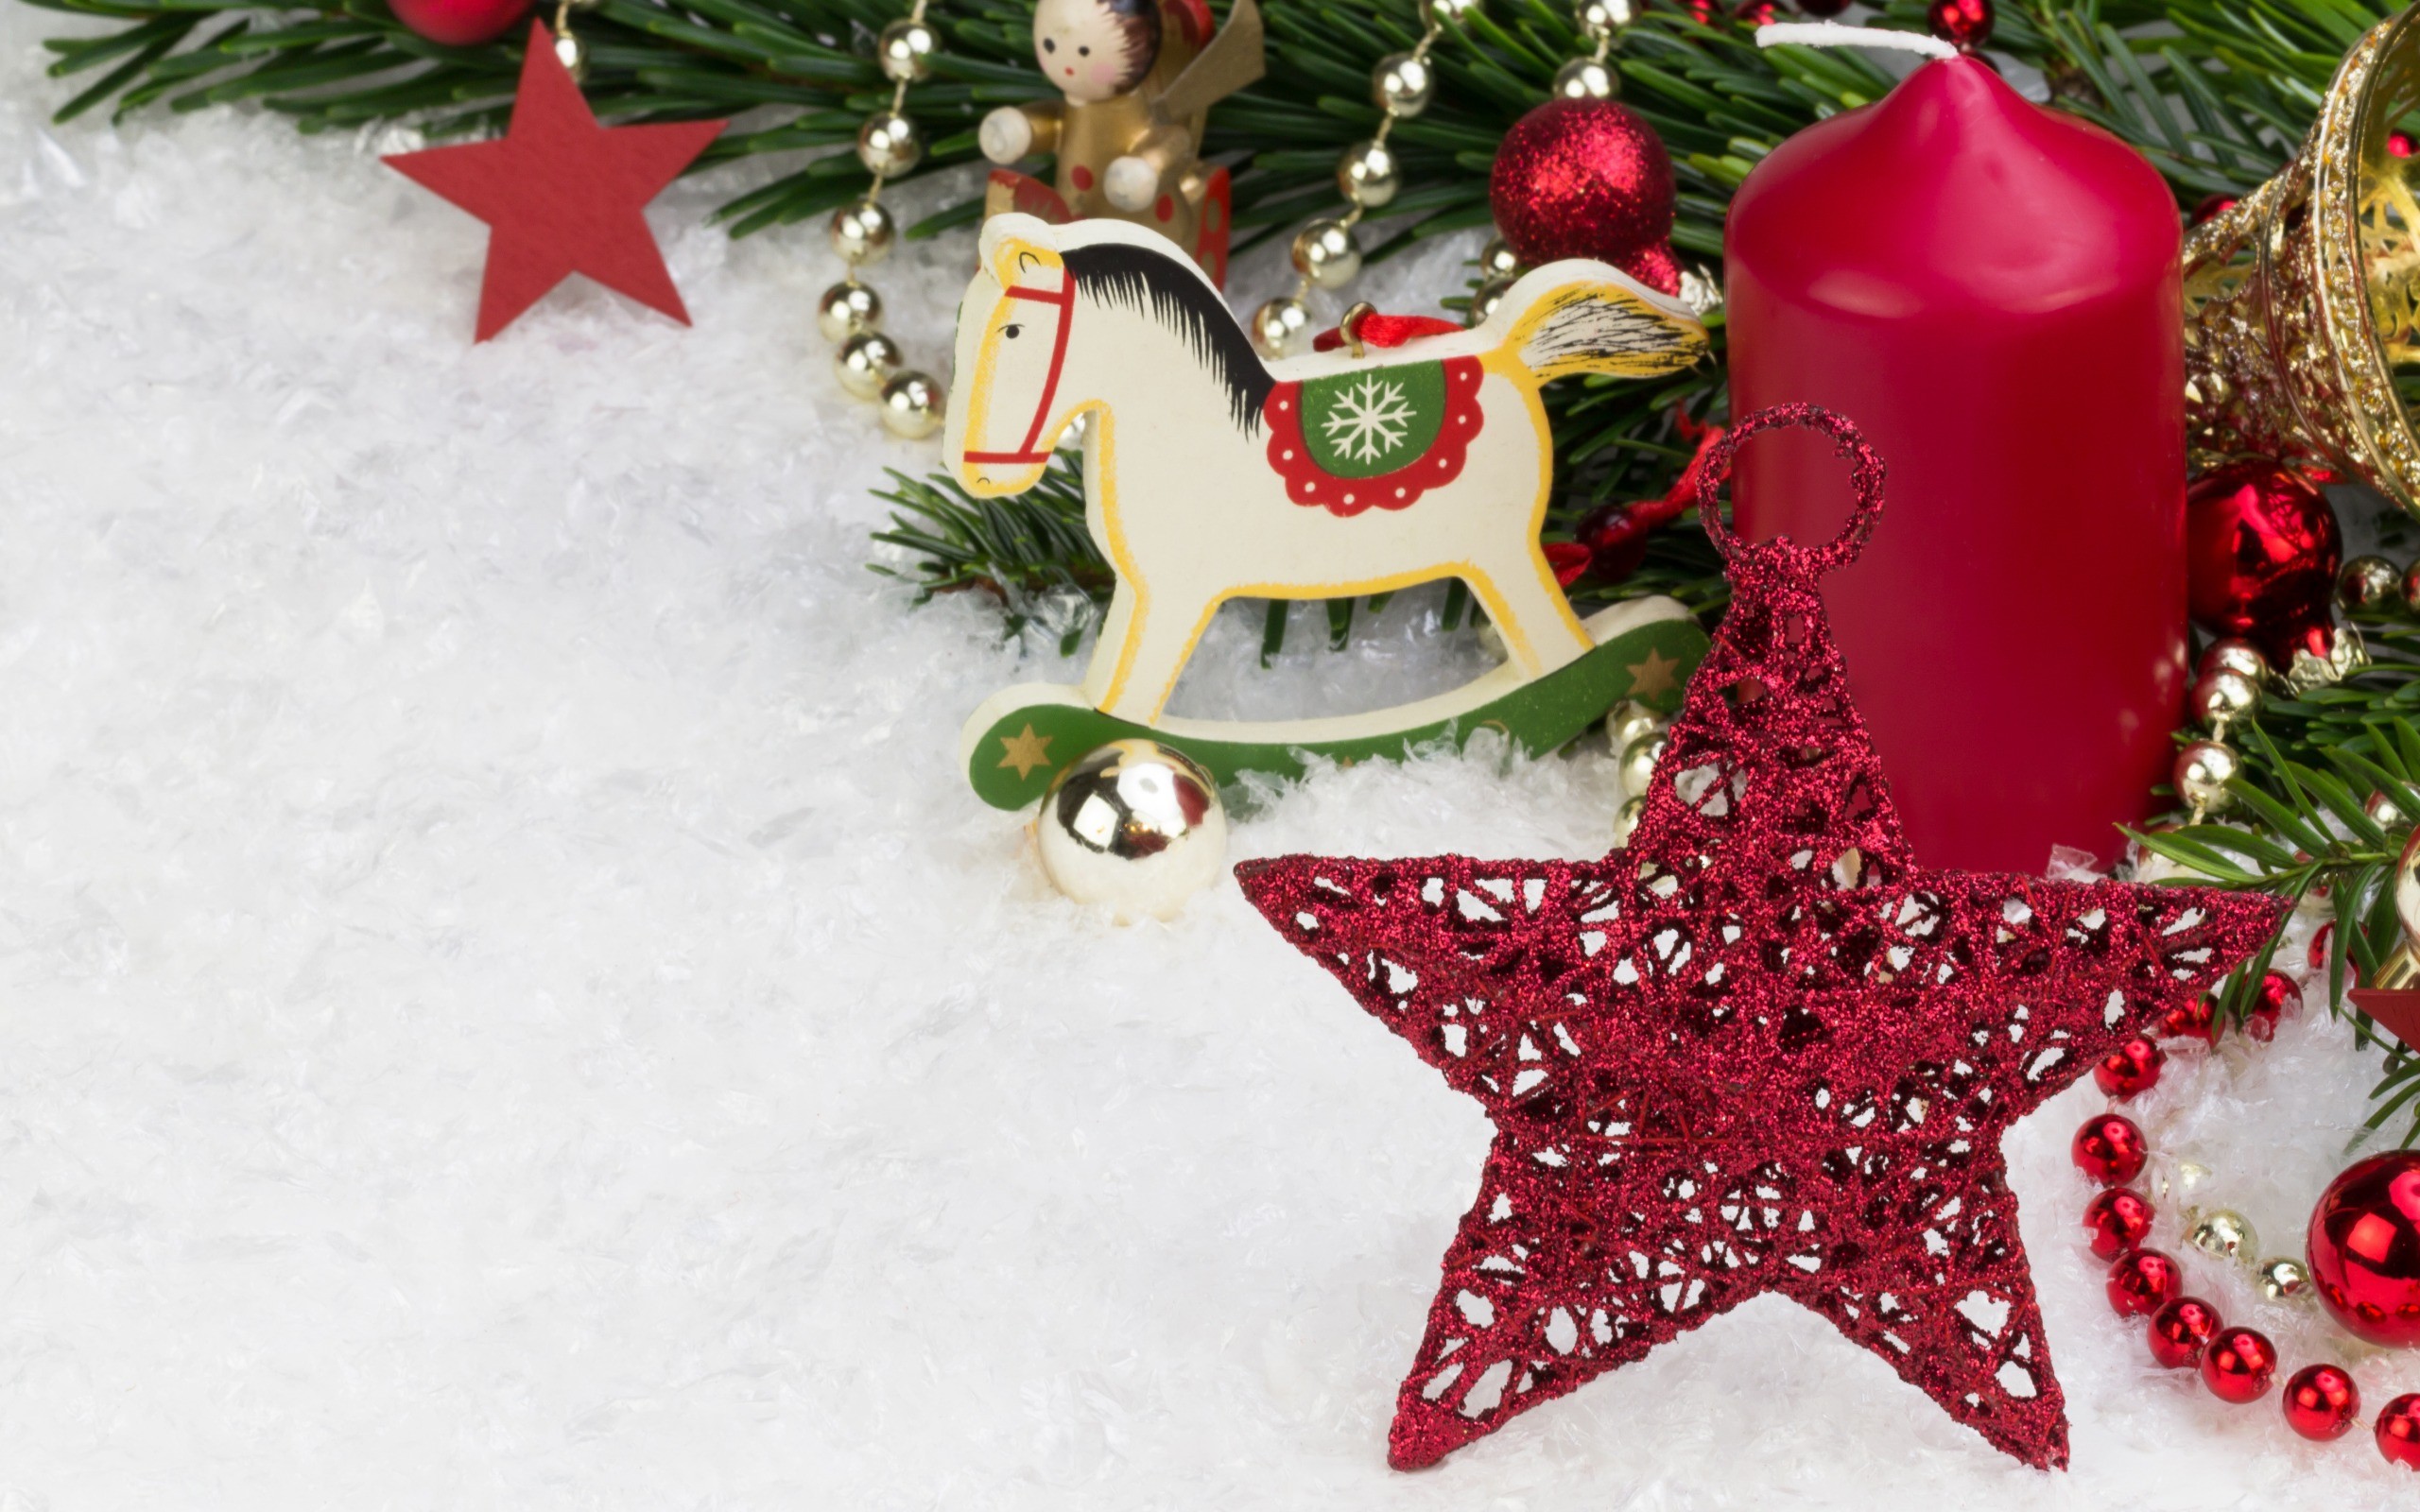 General 2560x1600 New Year snow horse decorations stars candles Christmas ornaments  Christmas holiday simple background closeup